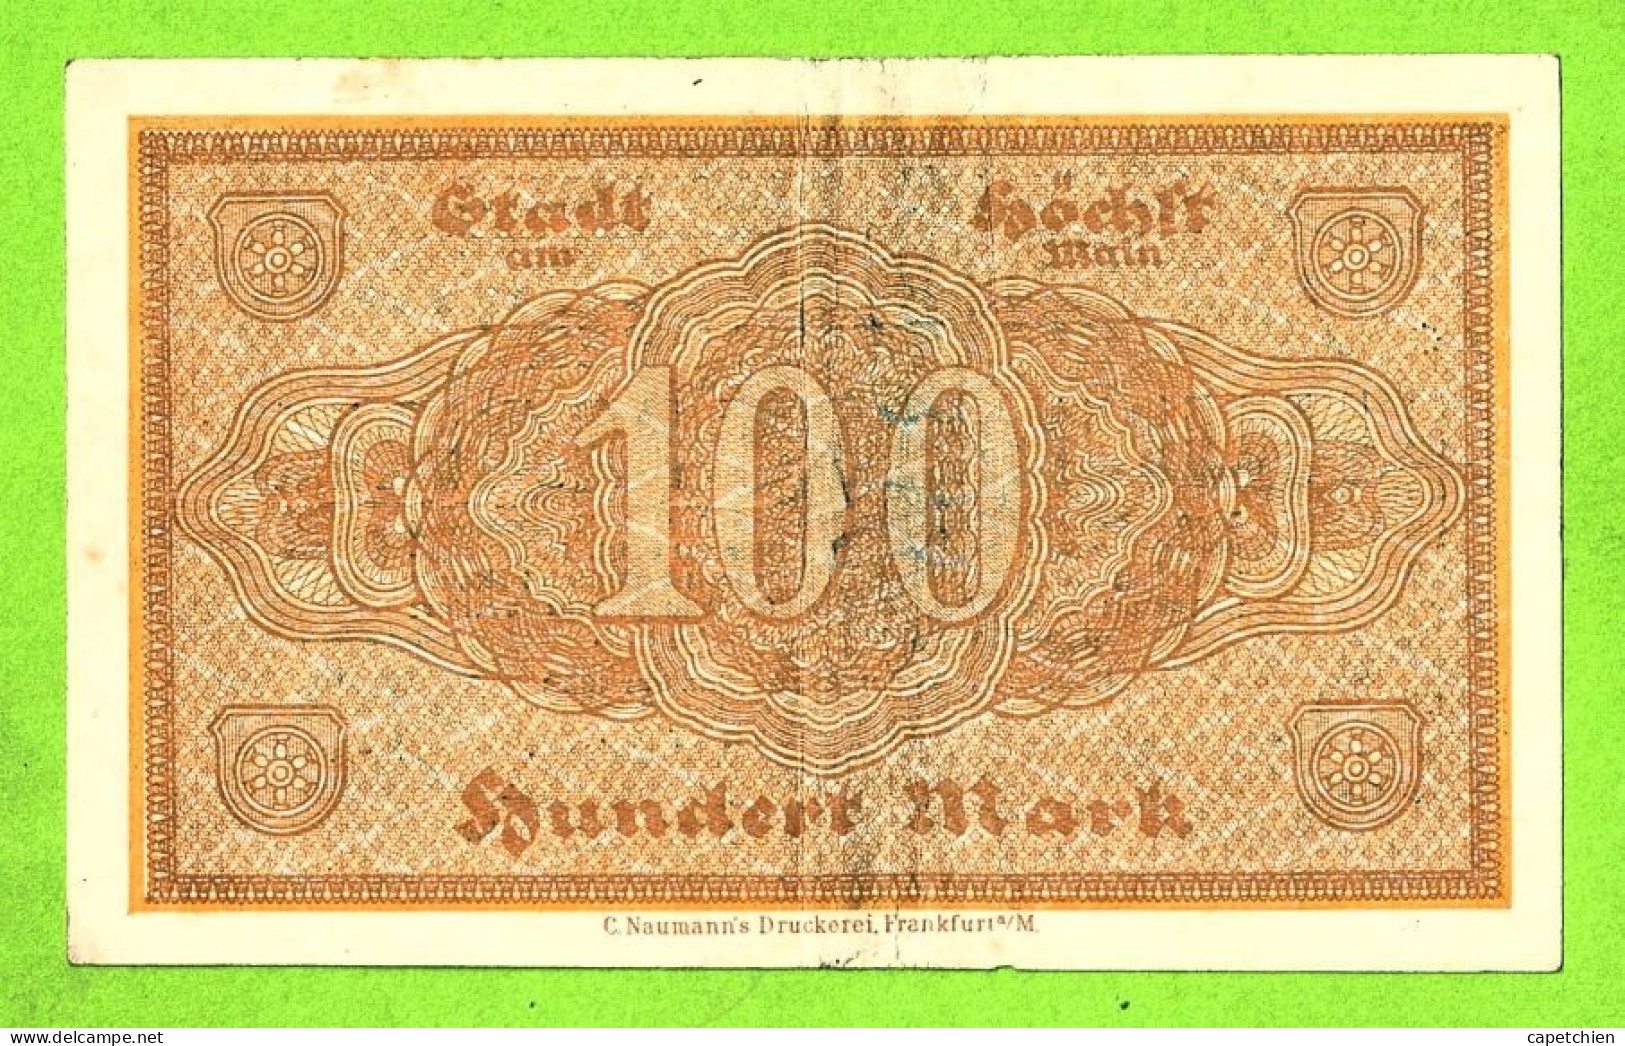 ALLEMAGNE / STADT HÖCHST Am MAIN HUNDERT MARK /  N° 047063 / 29 SEPTEMBRE 1922 - [11] Local Banknote Issues